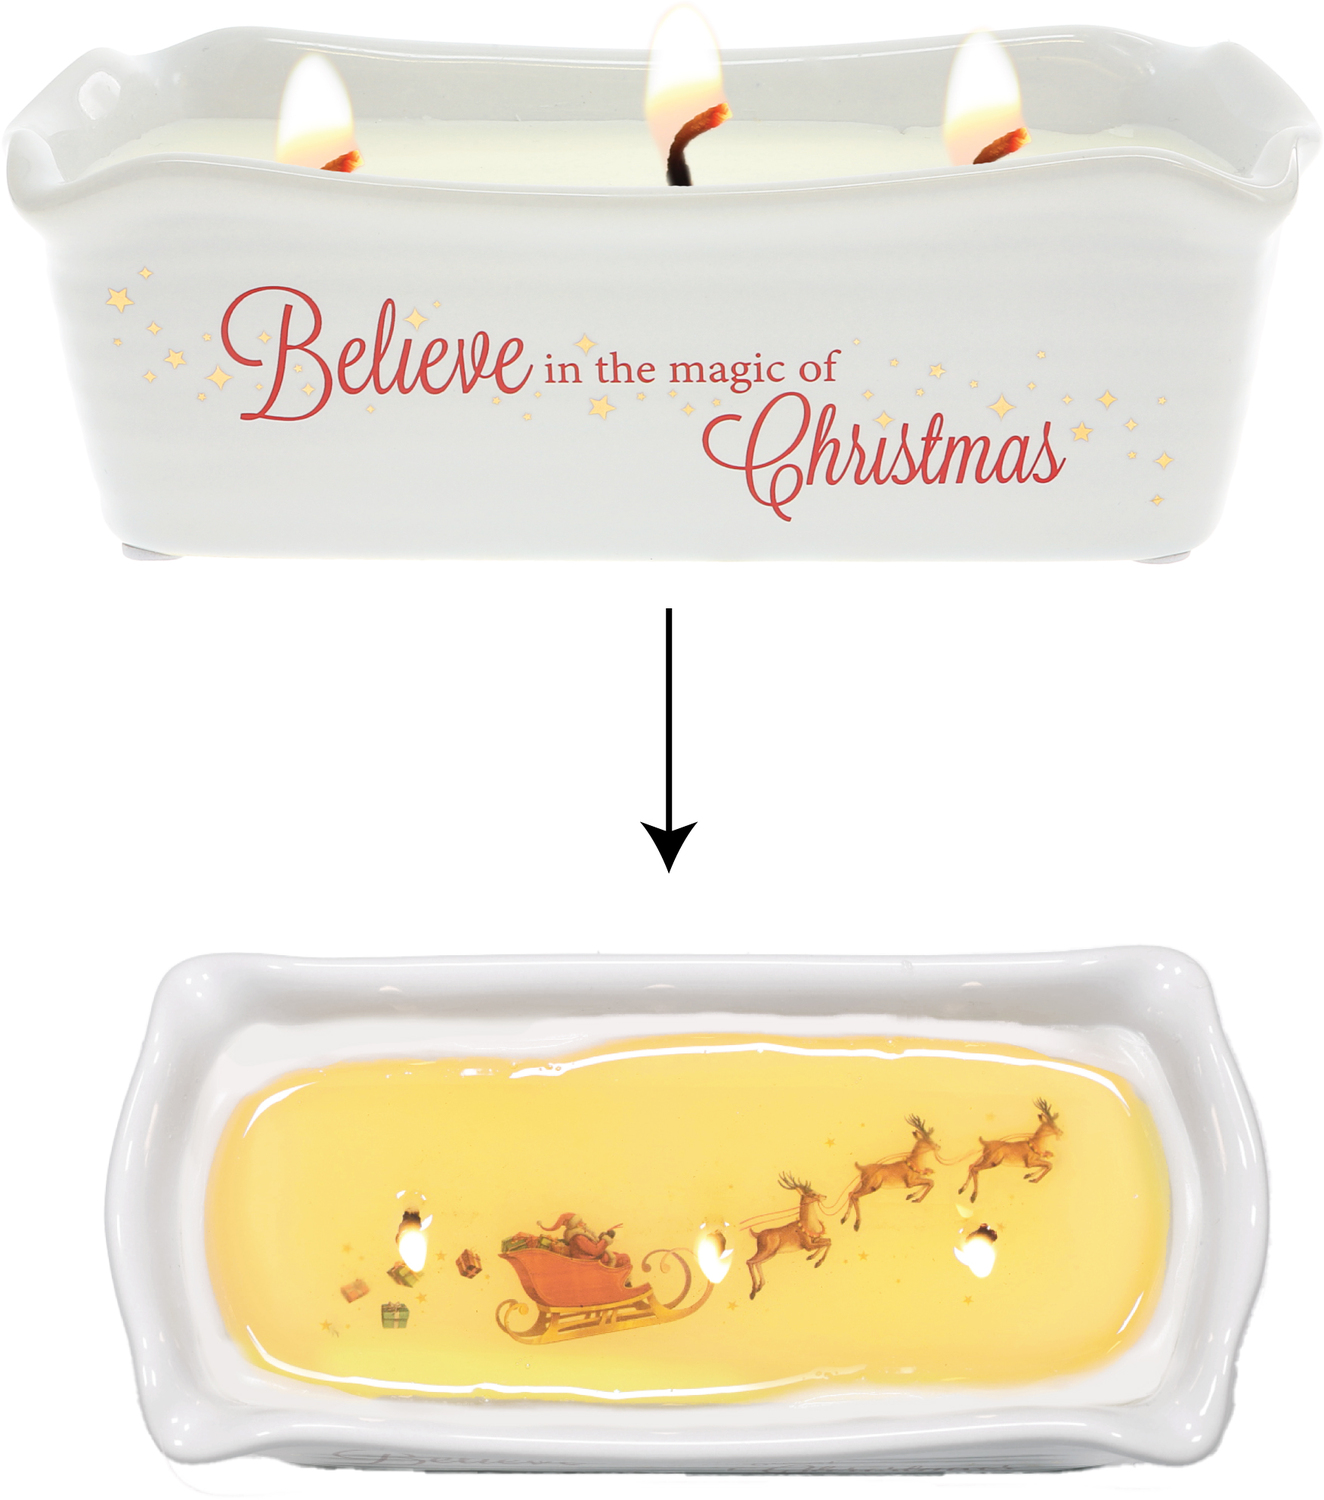 Believe by Thoughts of Home - Believe - 12 oz - 100% Soy Wax Reveal Triple Wick Candle
Scent: Vanilla Cinnamon